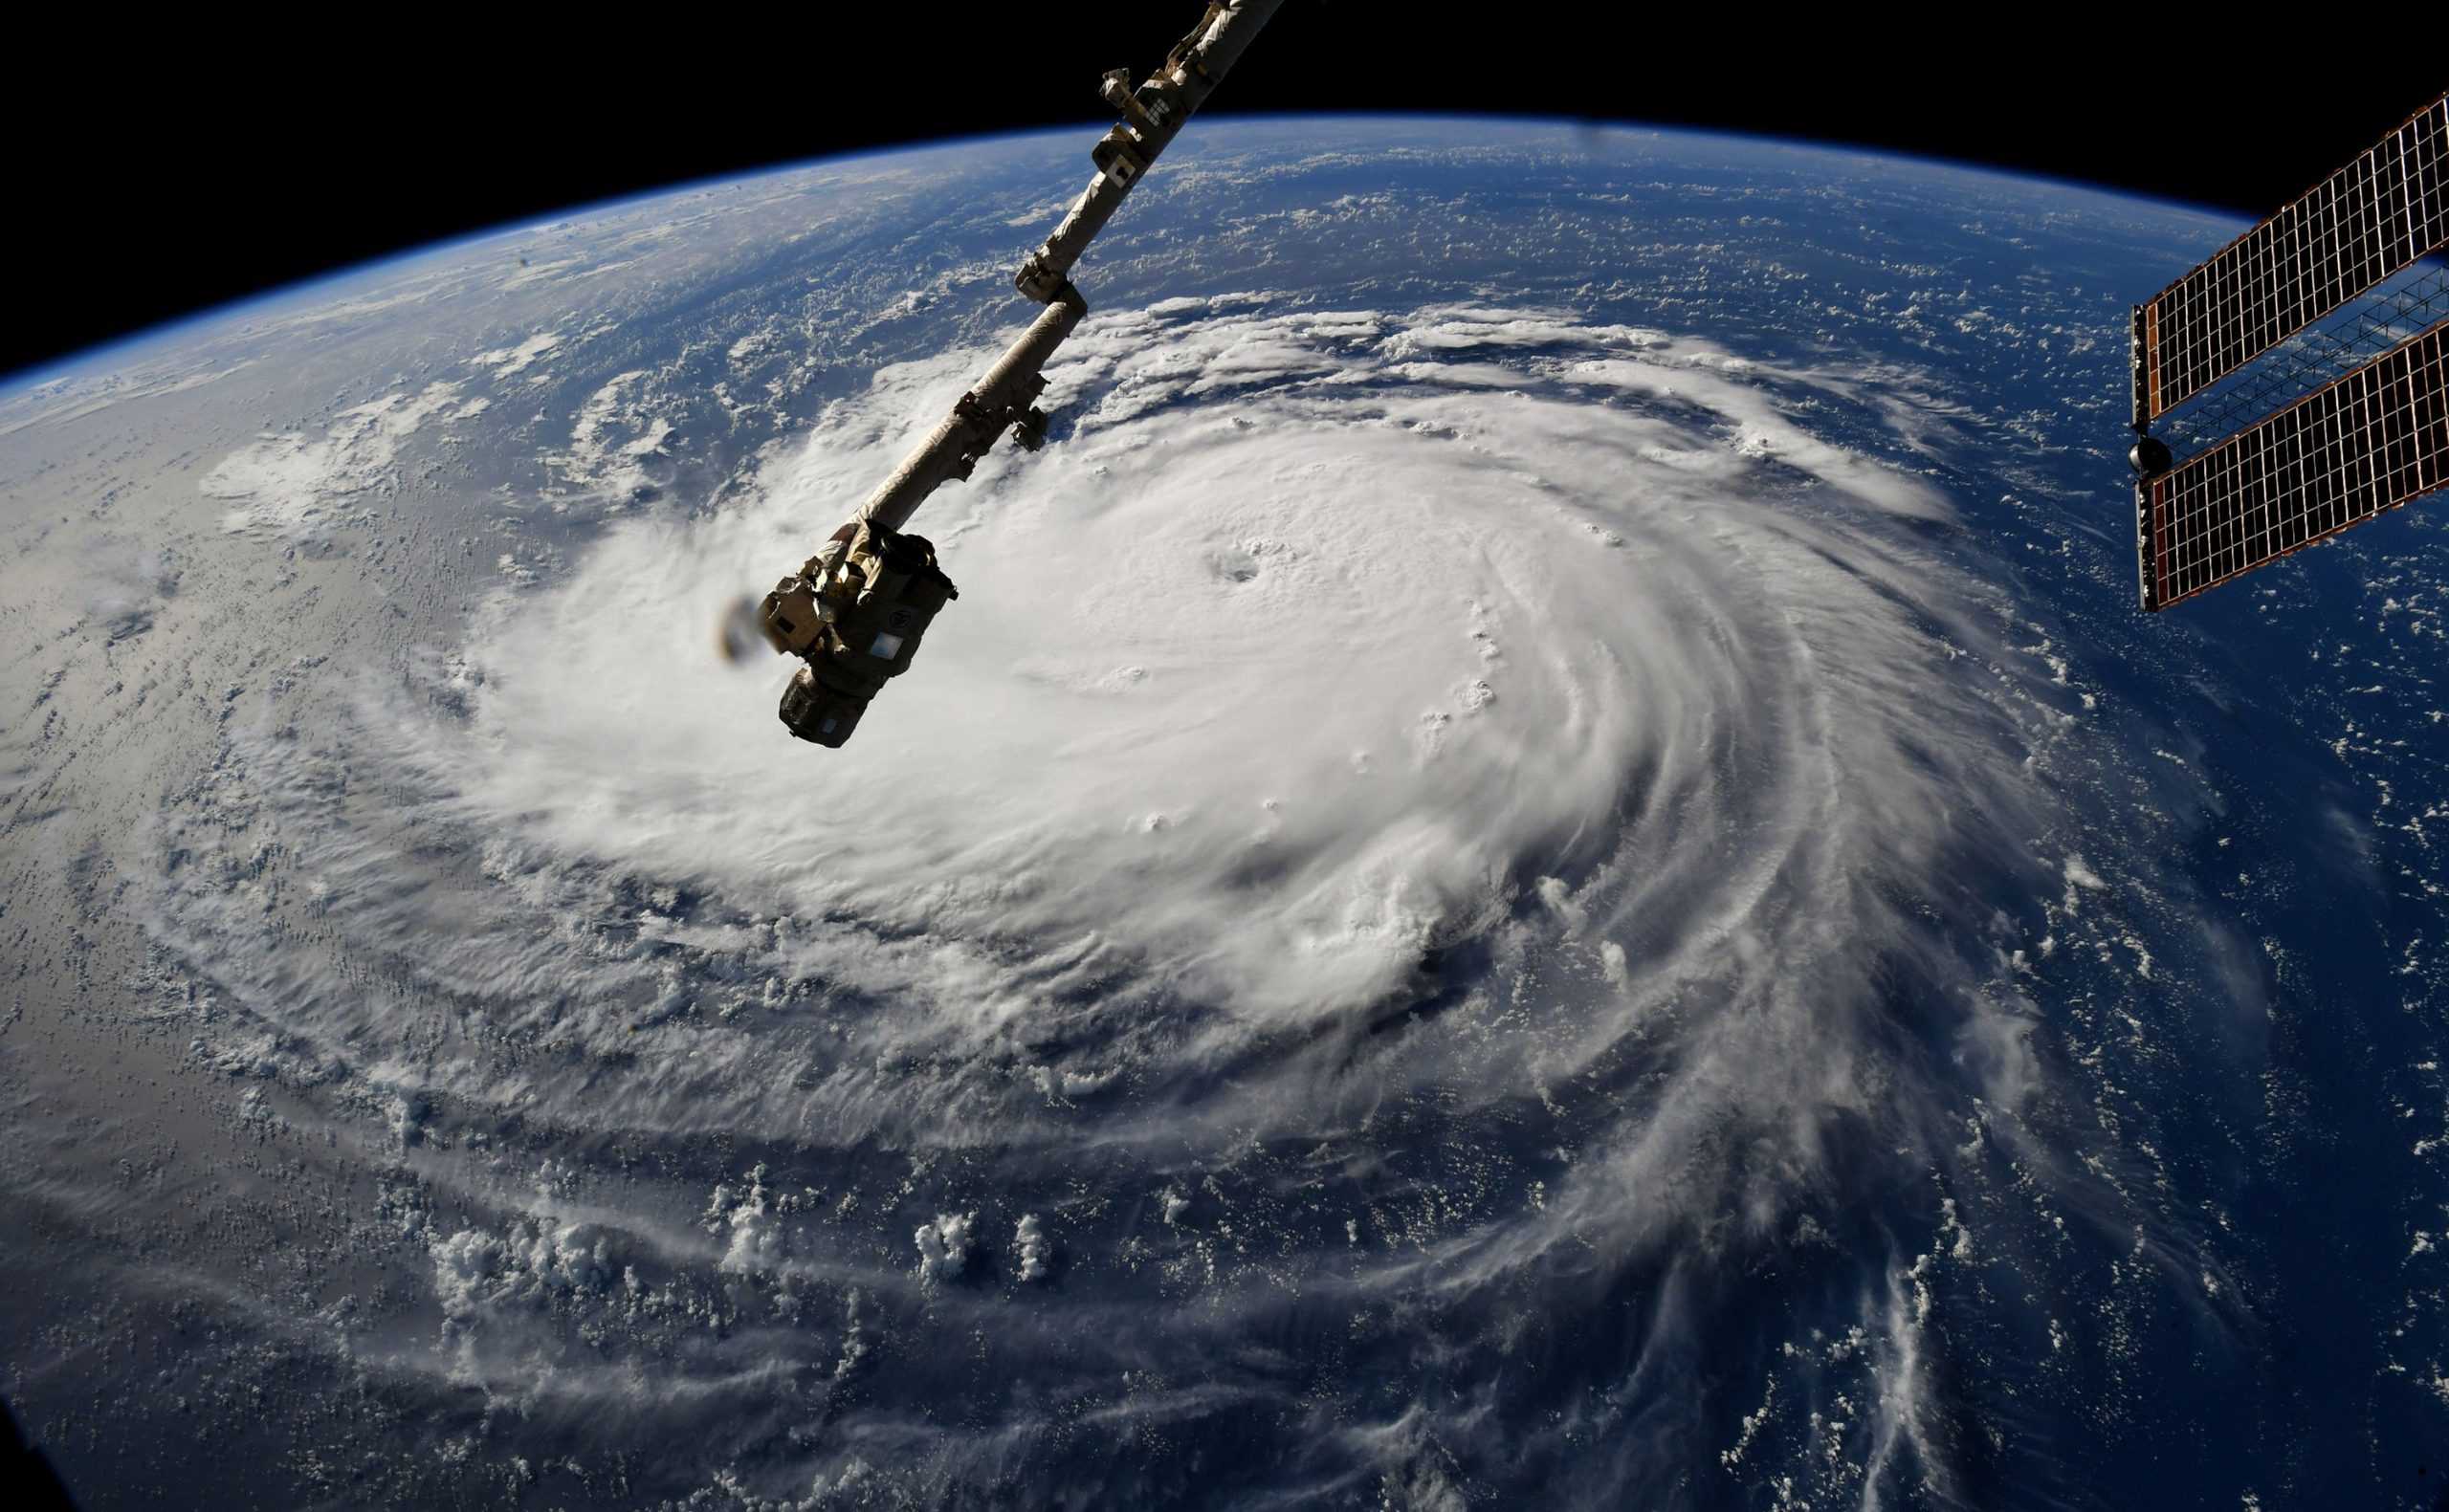 This photo from space shows Hurricane Florence from the International Space Station on Sept. 10, 2018, as it threatens the U.S. East Coast. Airlines are encouraging customers whose plans could be affected by the storm to reschedule travel. (NASA)